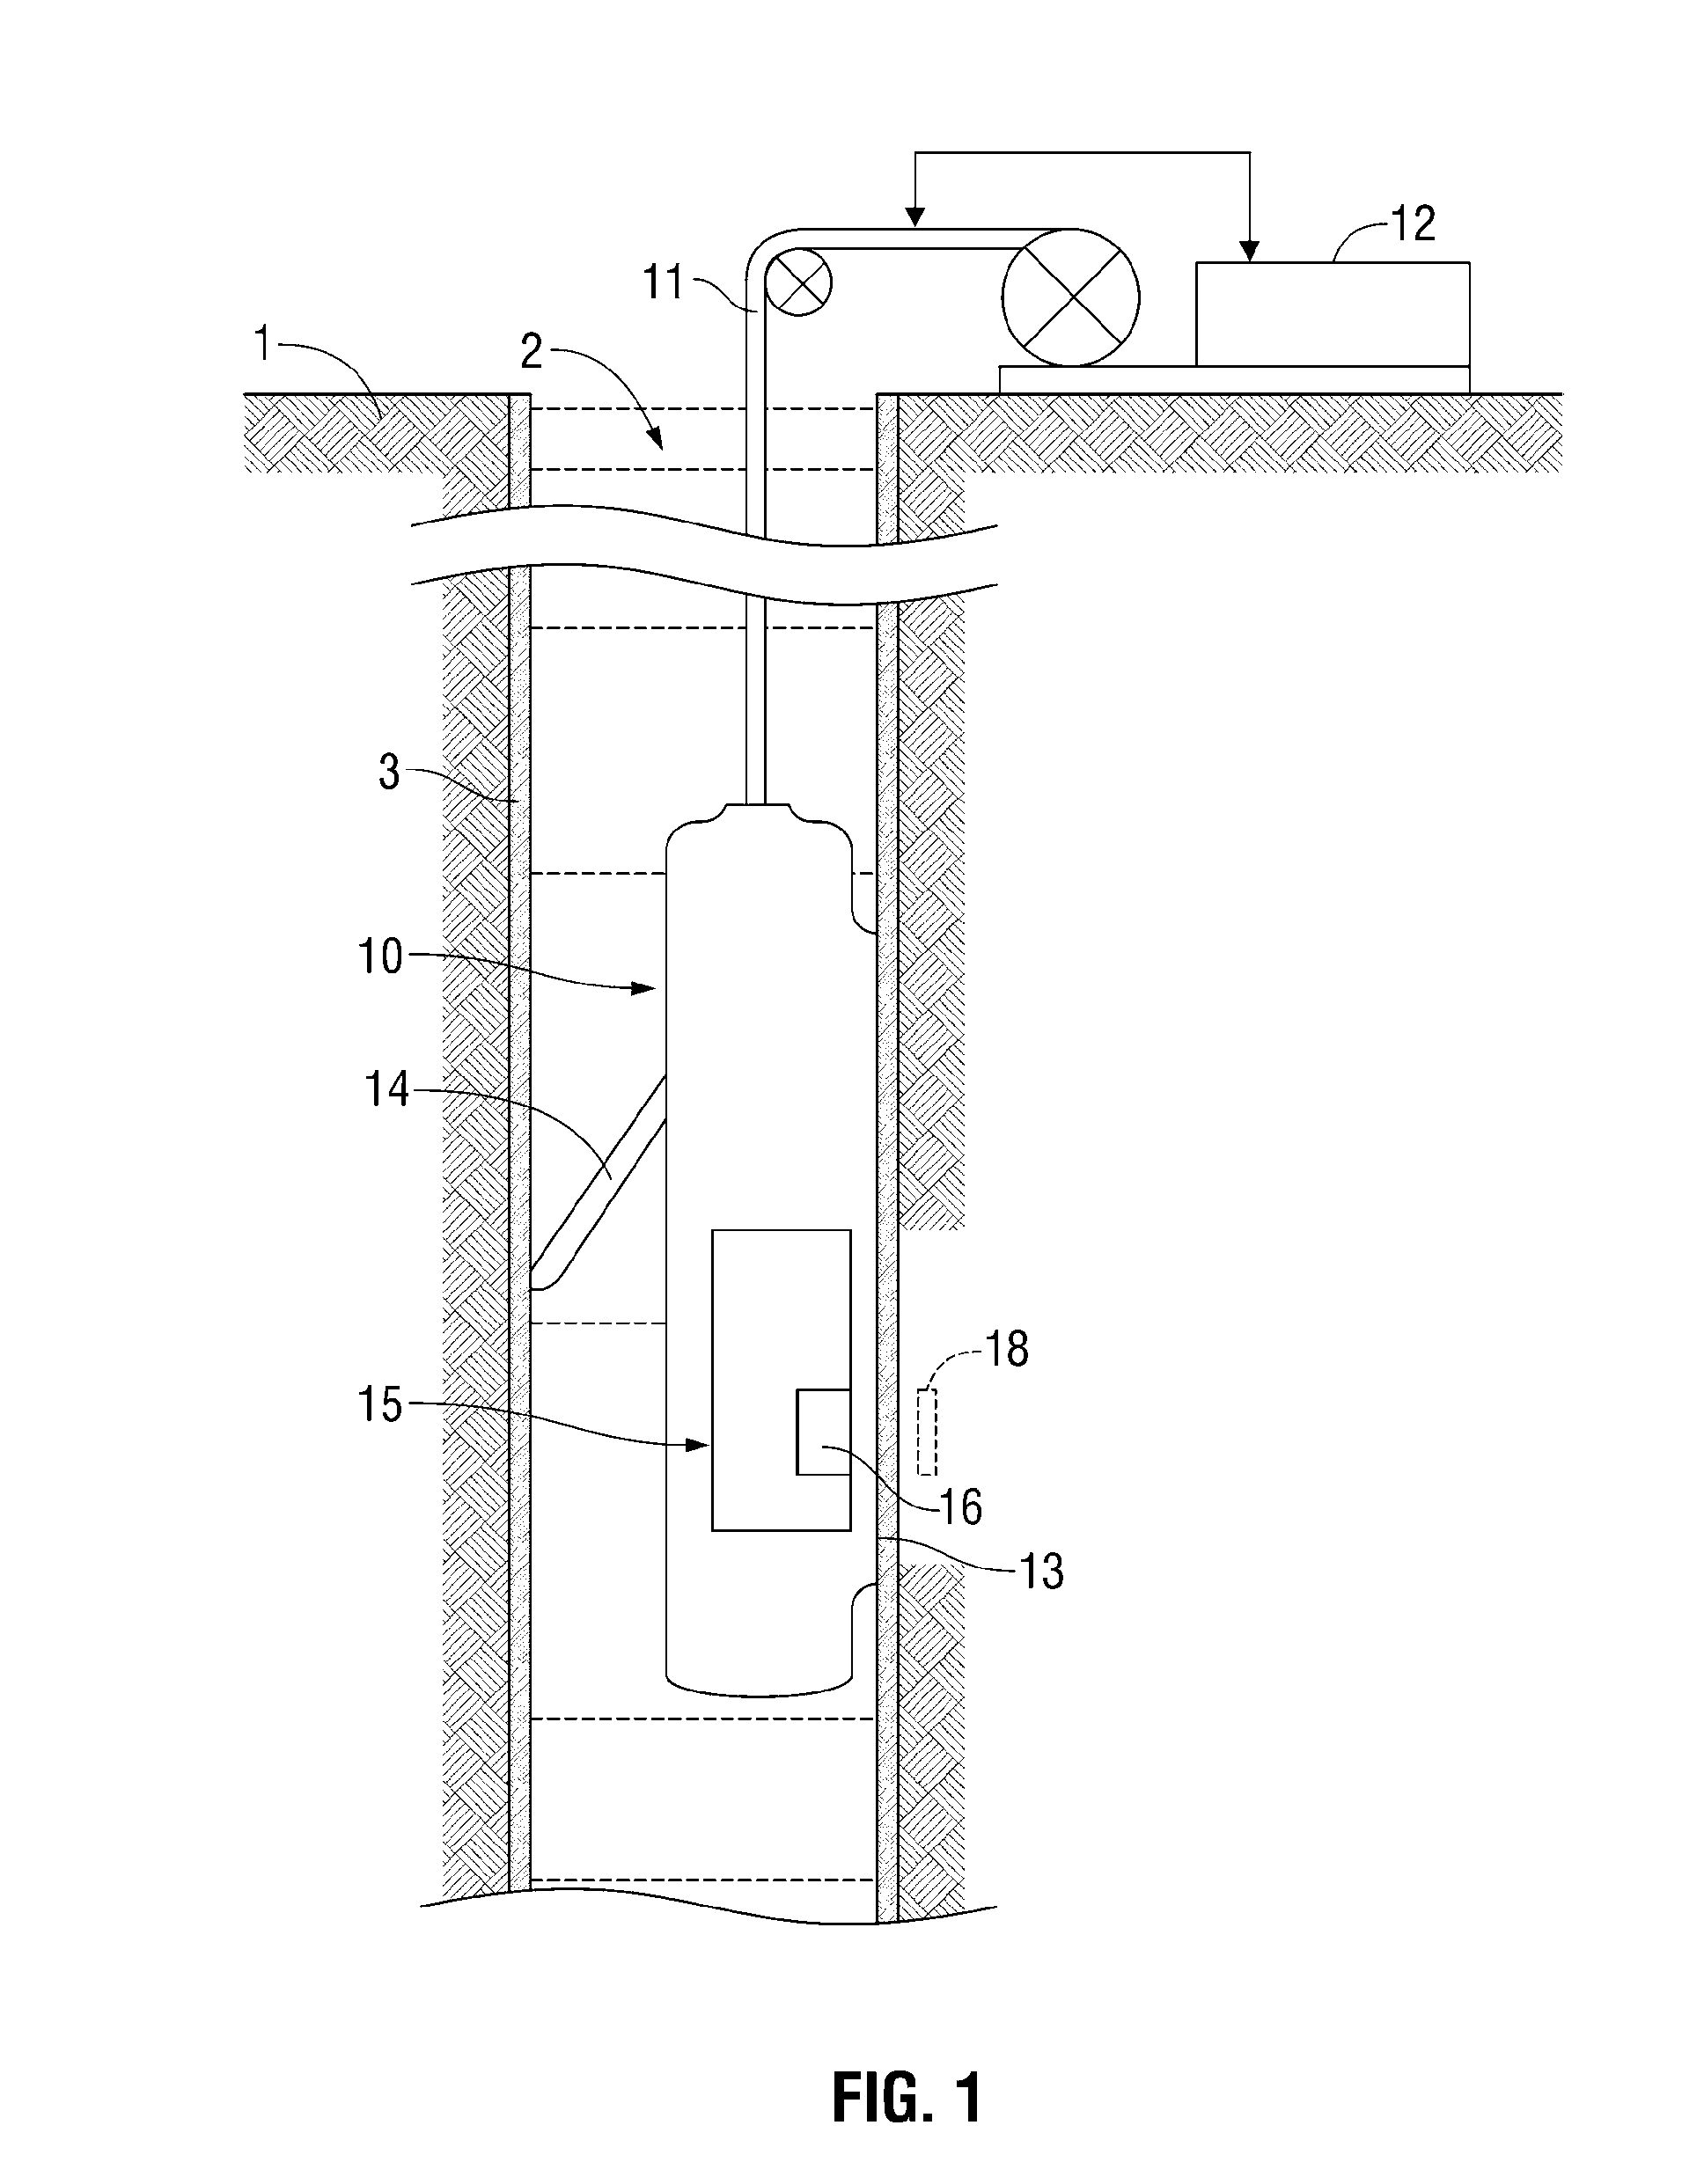 System for emulating nuclear magnetic resonance well logging tool diffusion editing measurements on a bench-top nuclear magnetic resonance spectrometer for laboratory-scale rock core analyis